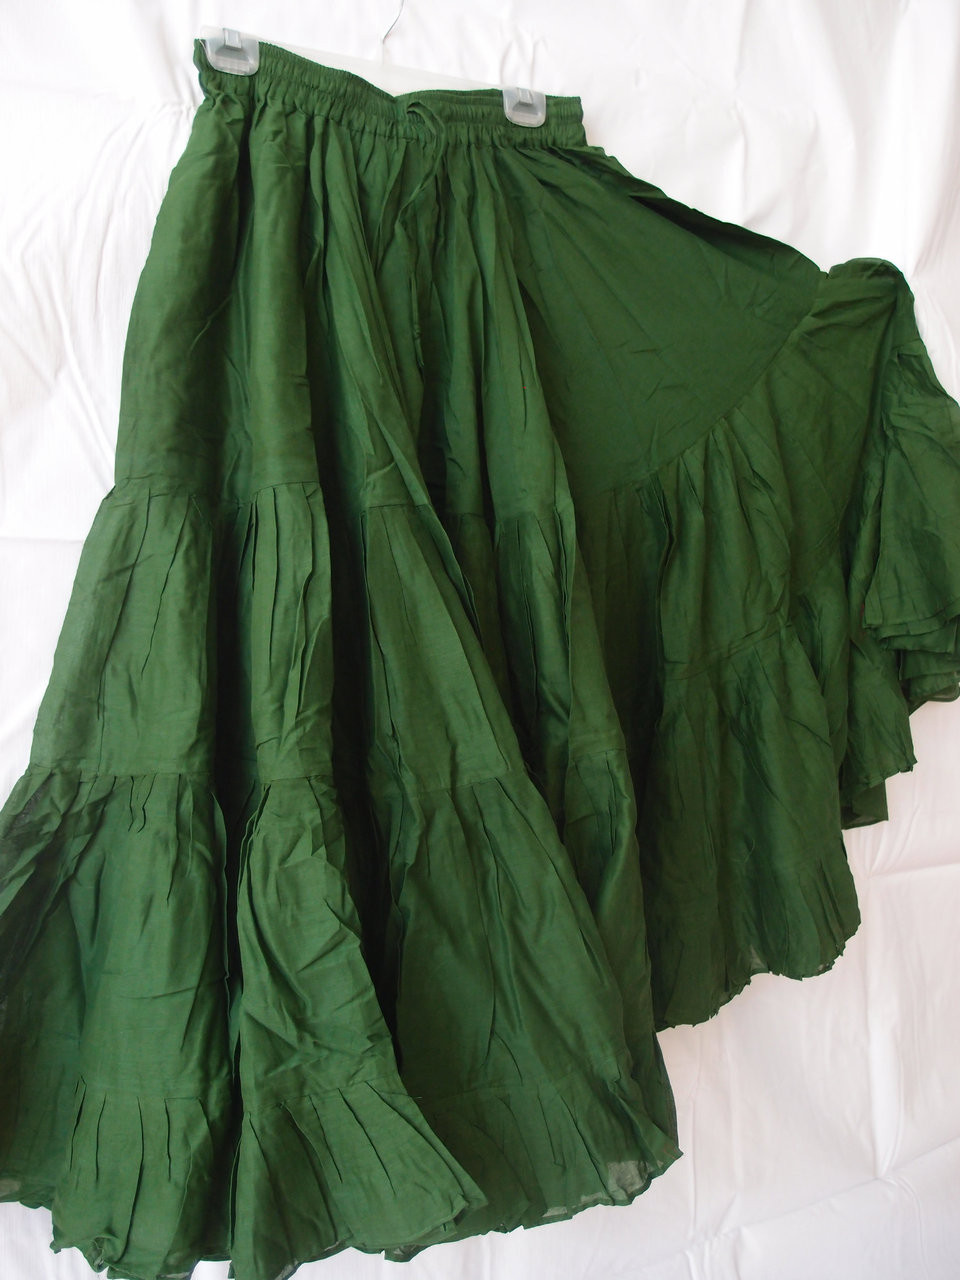 32 Yard Pure Cotton Light and Fluffy Skirt EMERALD GREEN - Magical Fashions